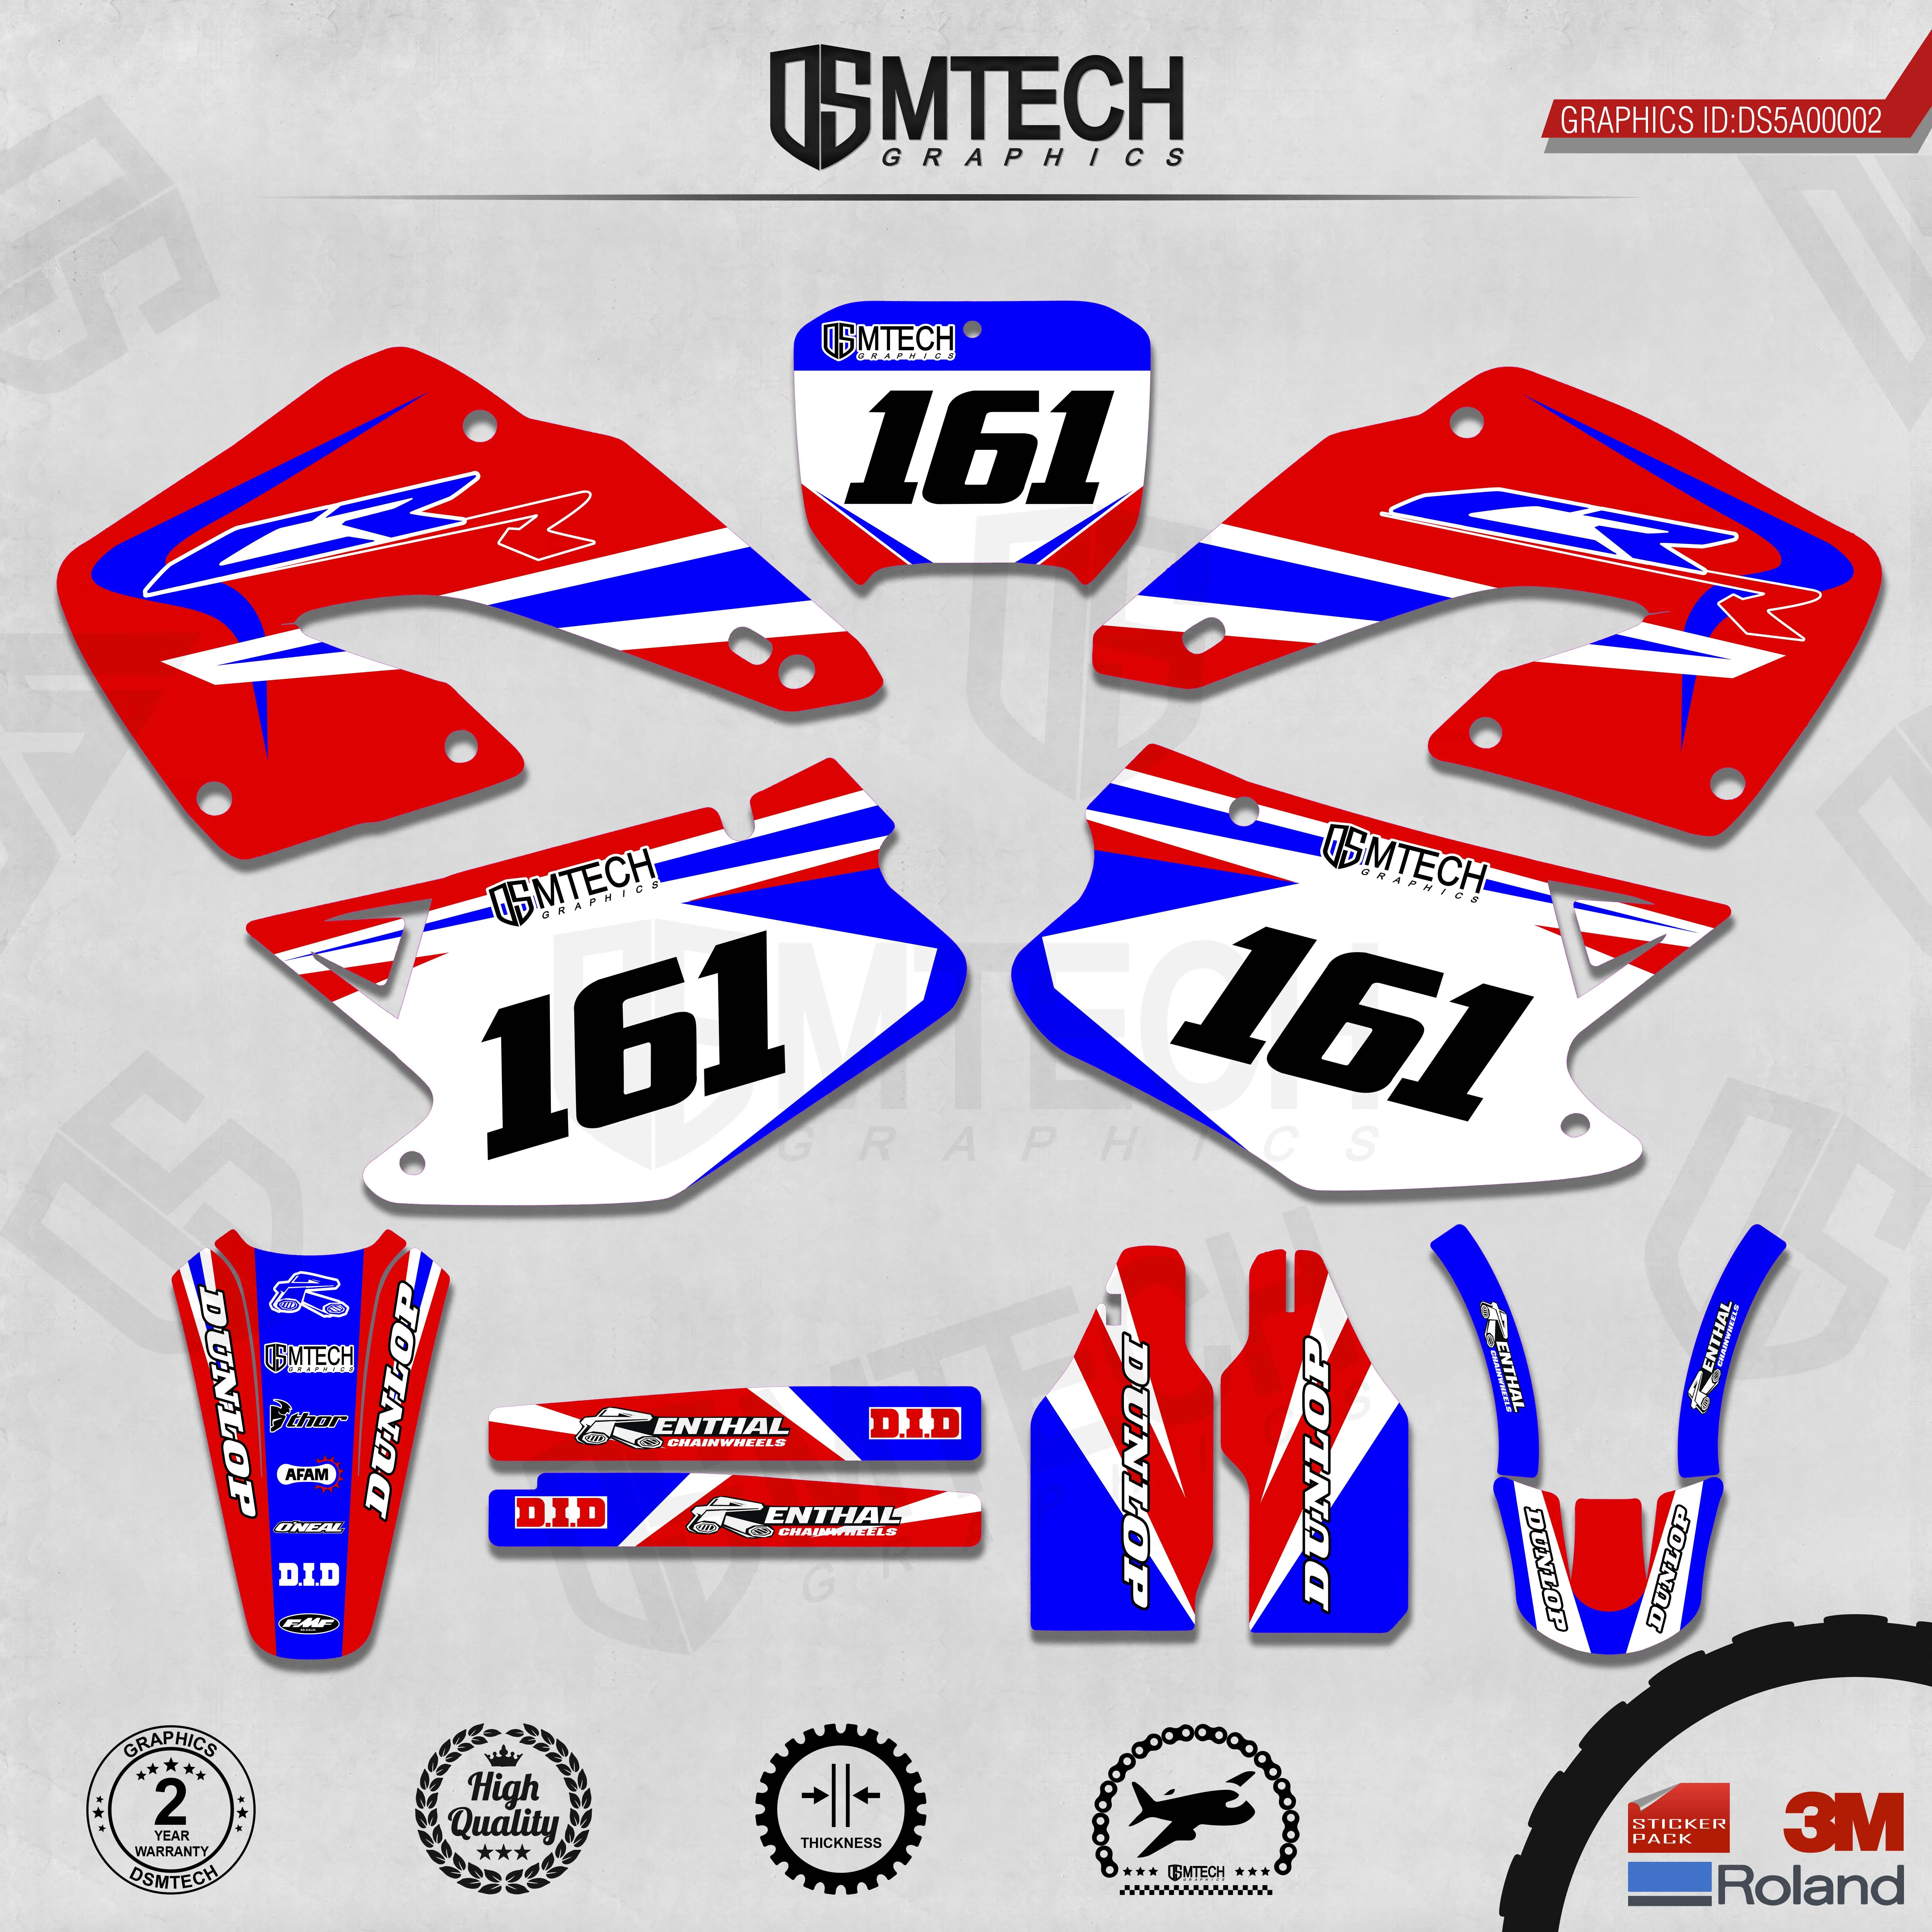 DSMTECH Customized Team Graphics Backgrounds Decals 3M Custom Stickers For 2000-2001 CR125-250 002